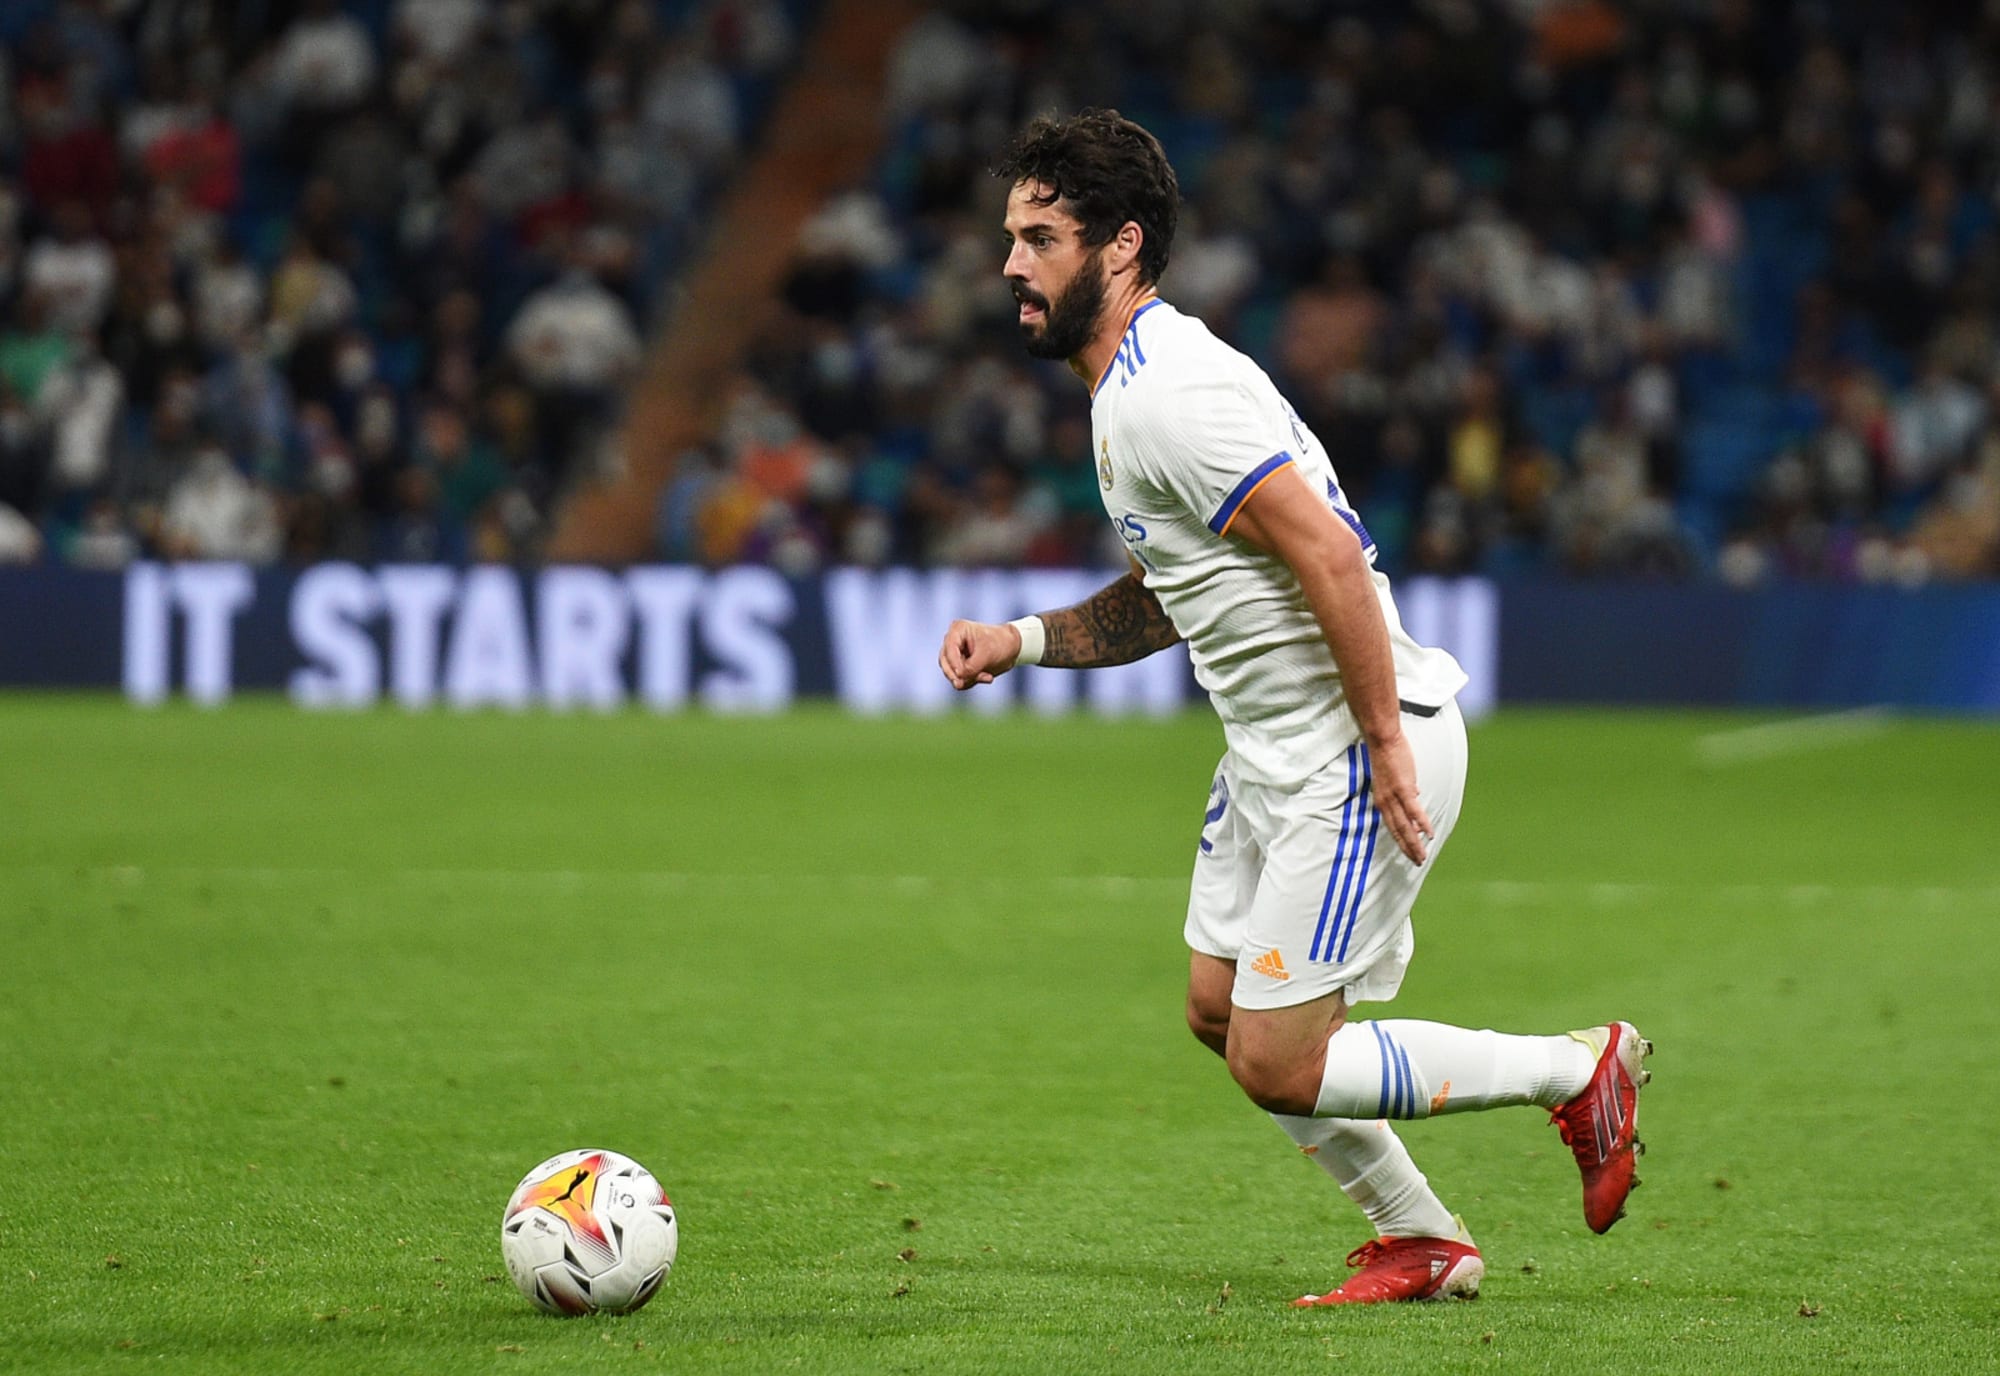 Spanish press say Isco likely to join Everton if he leaves Real